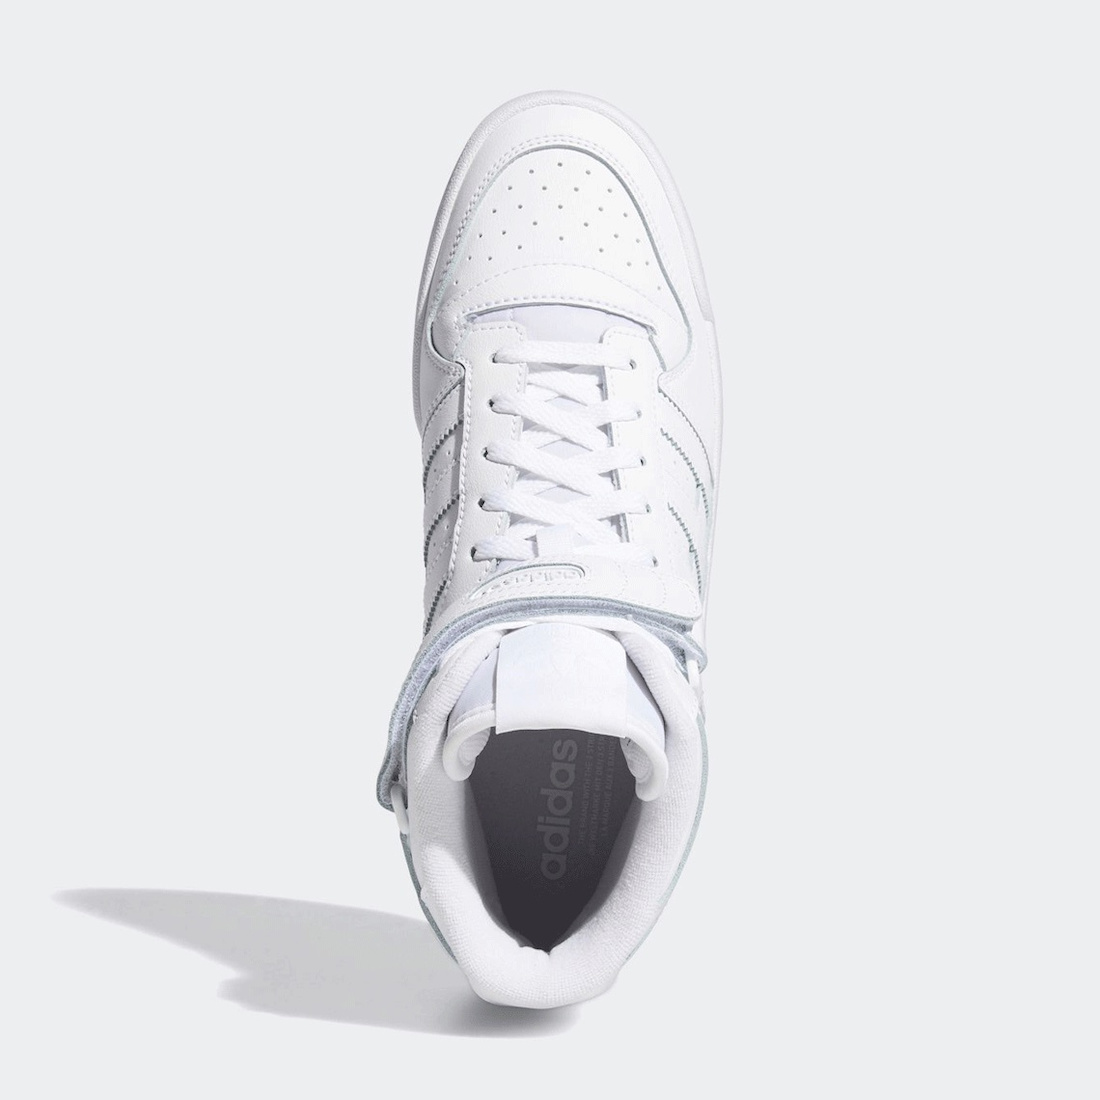 adidas Forum Mid Triple White FY4975 Release Date